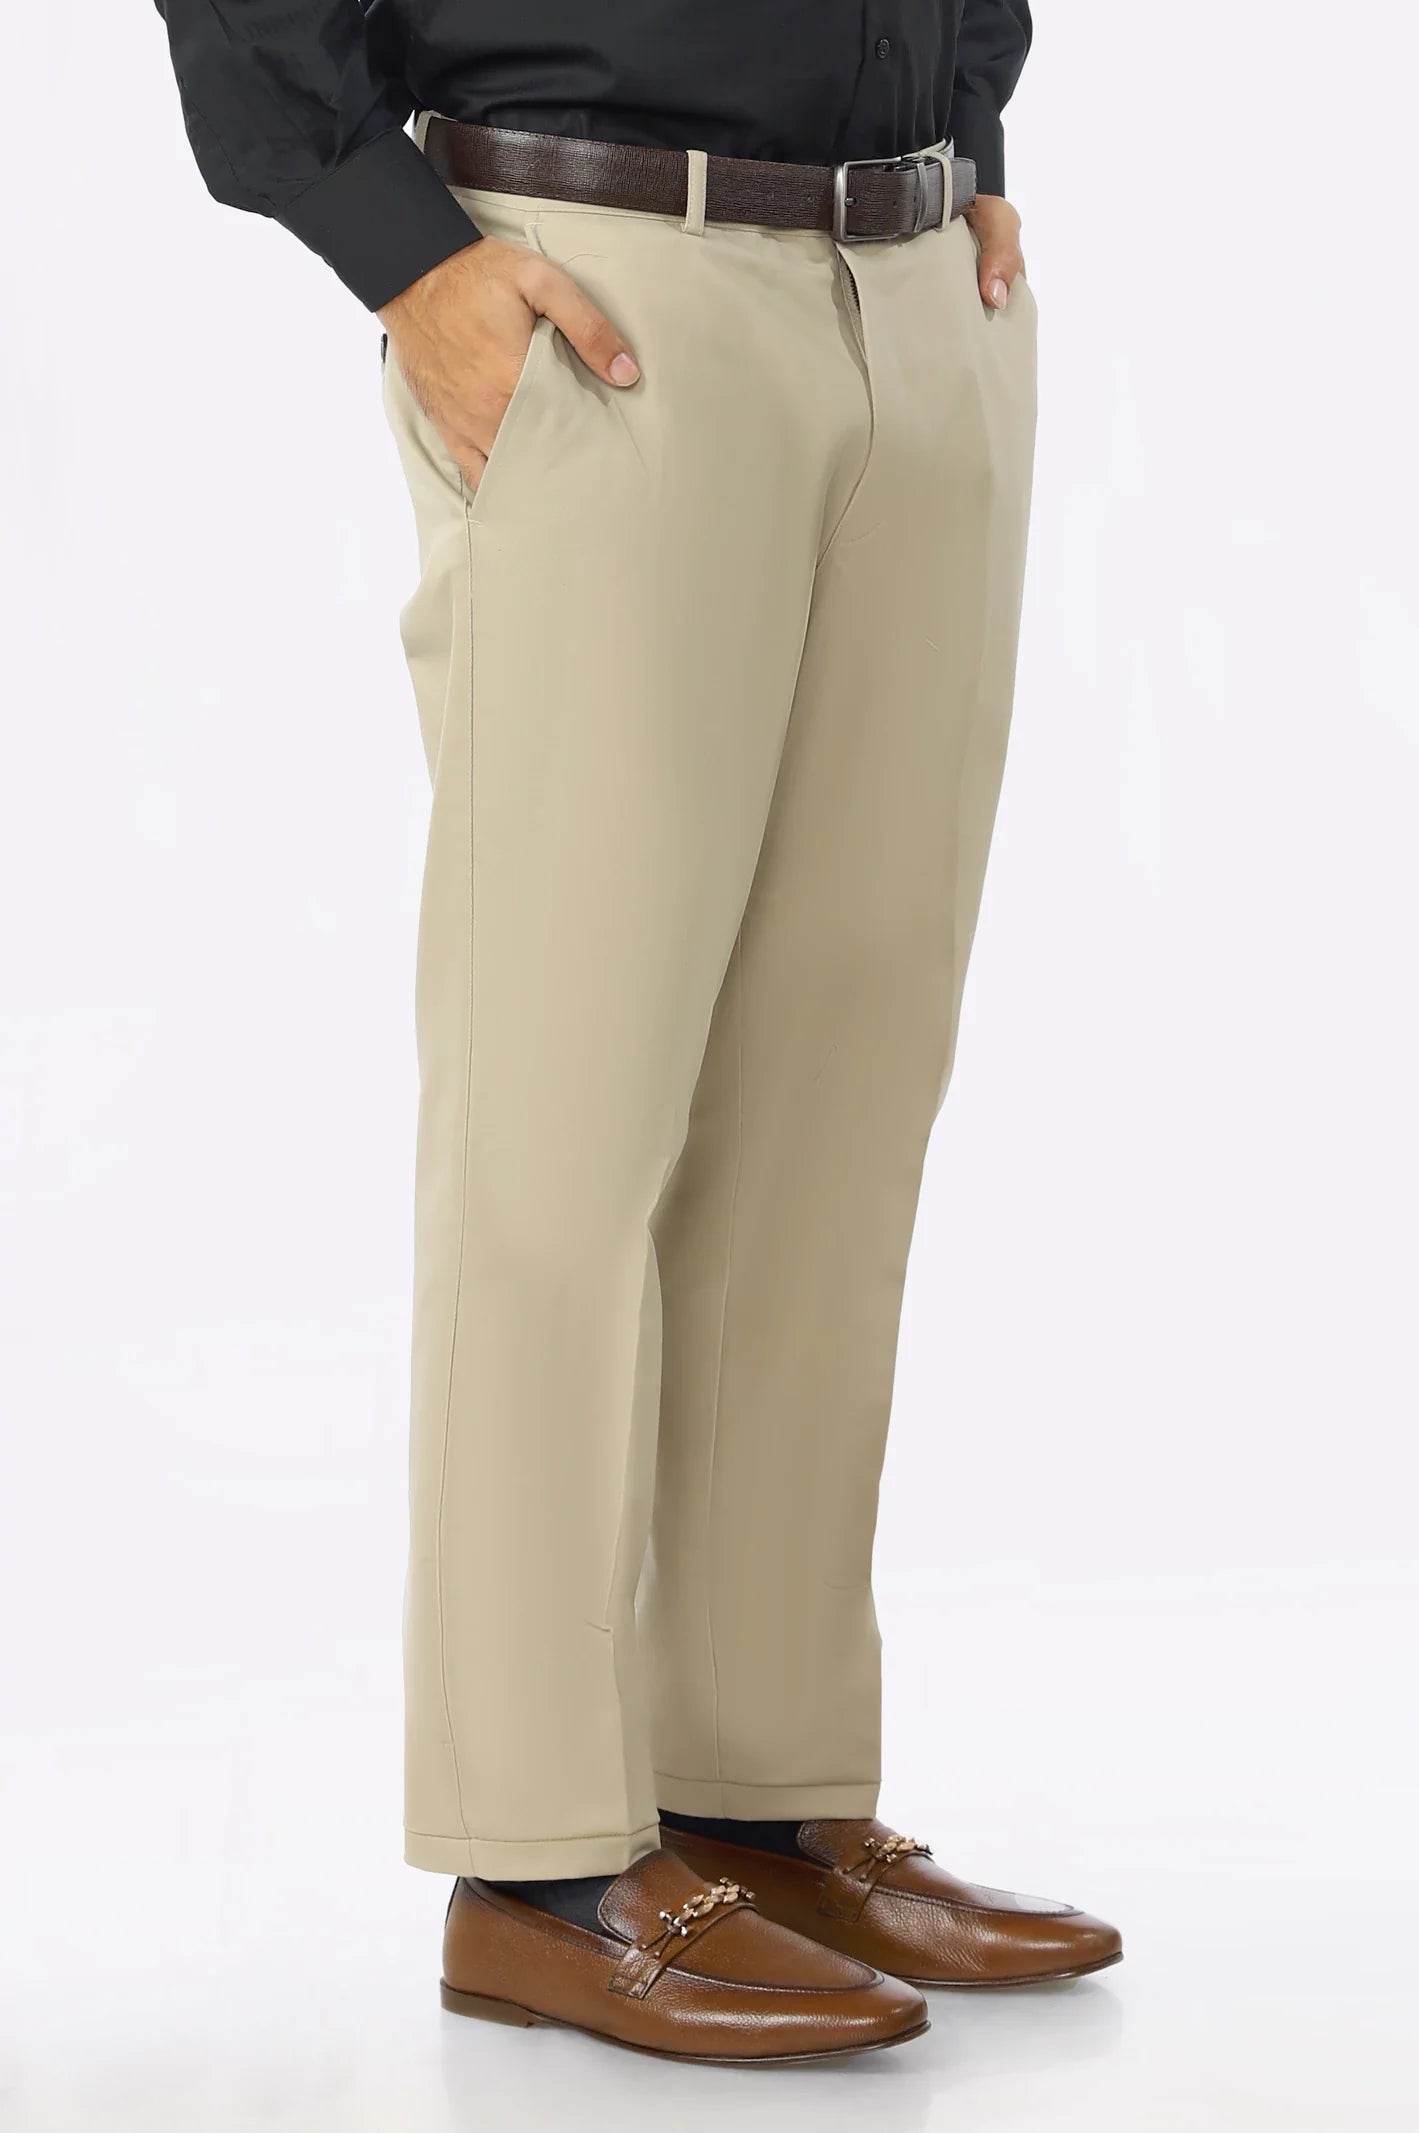 Khaki Formal Cotton Trouser From Diners